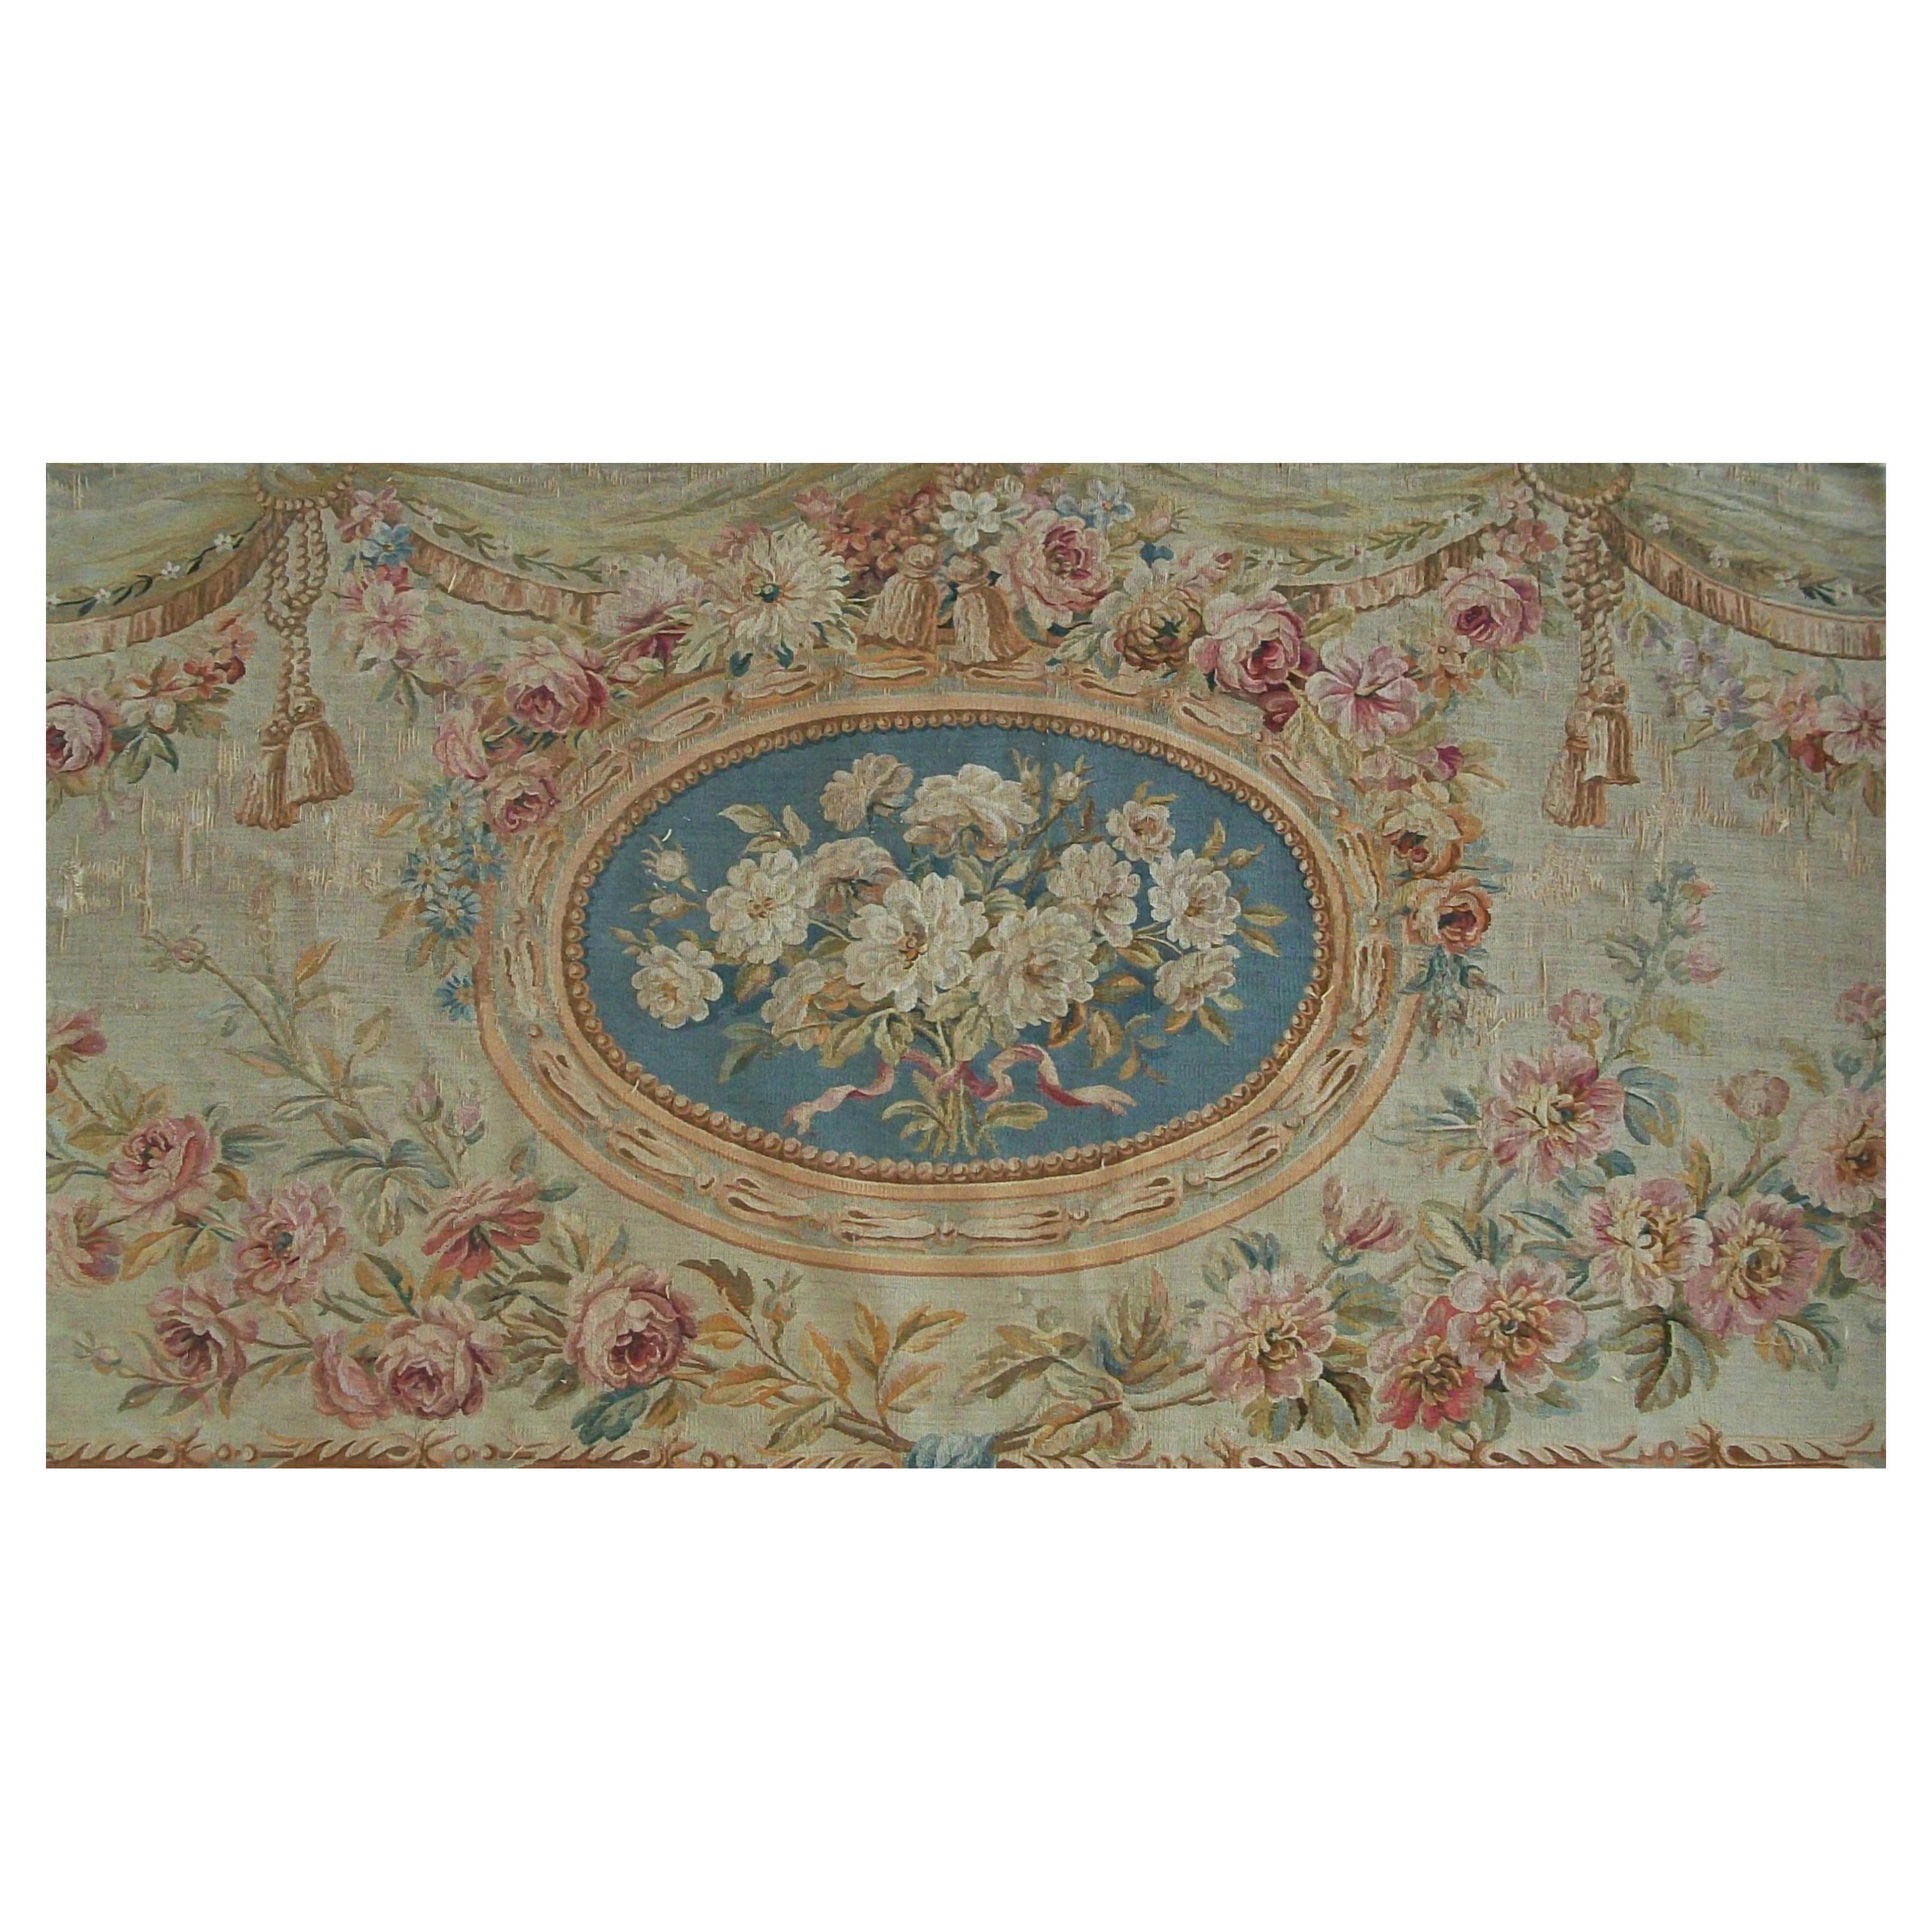 Pierre Adrien Chabal, Louis XVI Style Beauvais Tapestry Panel, France - C.1855